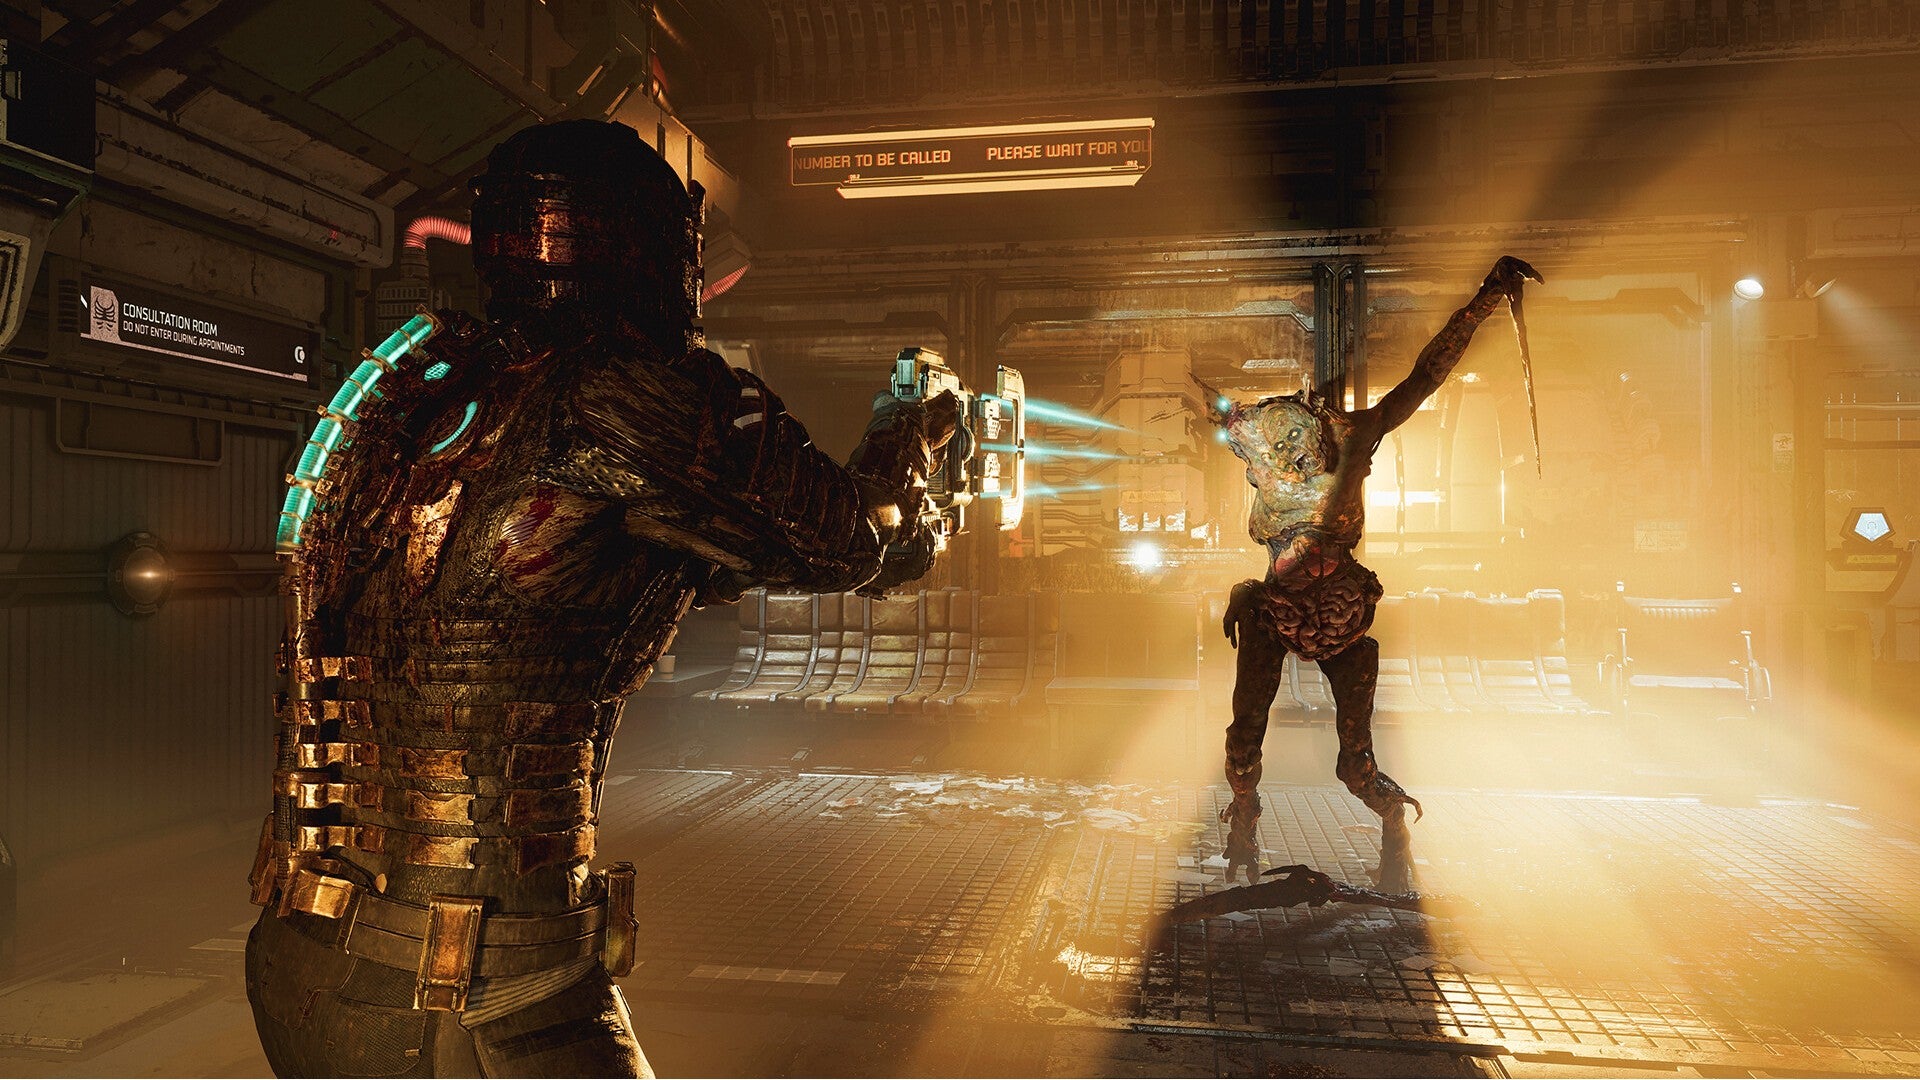 Dead Space image showing Isaac firing a a Necromorph with the Plasma Cutter.